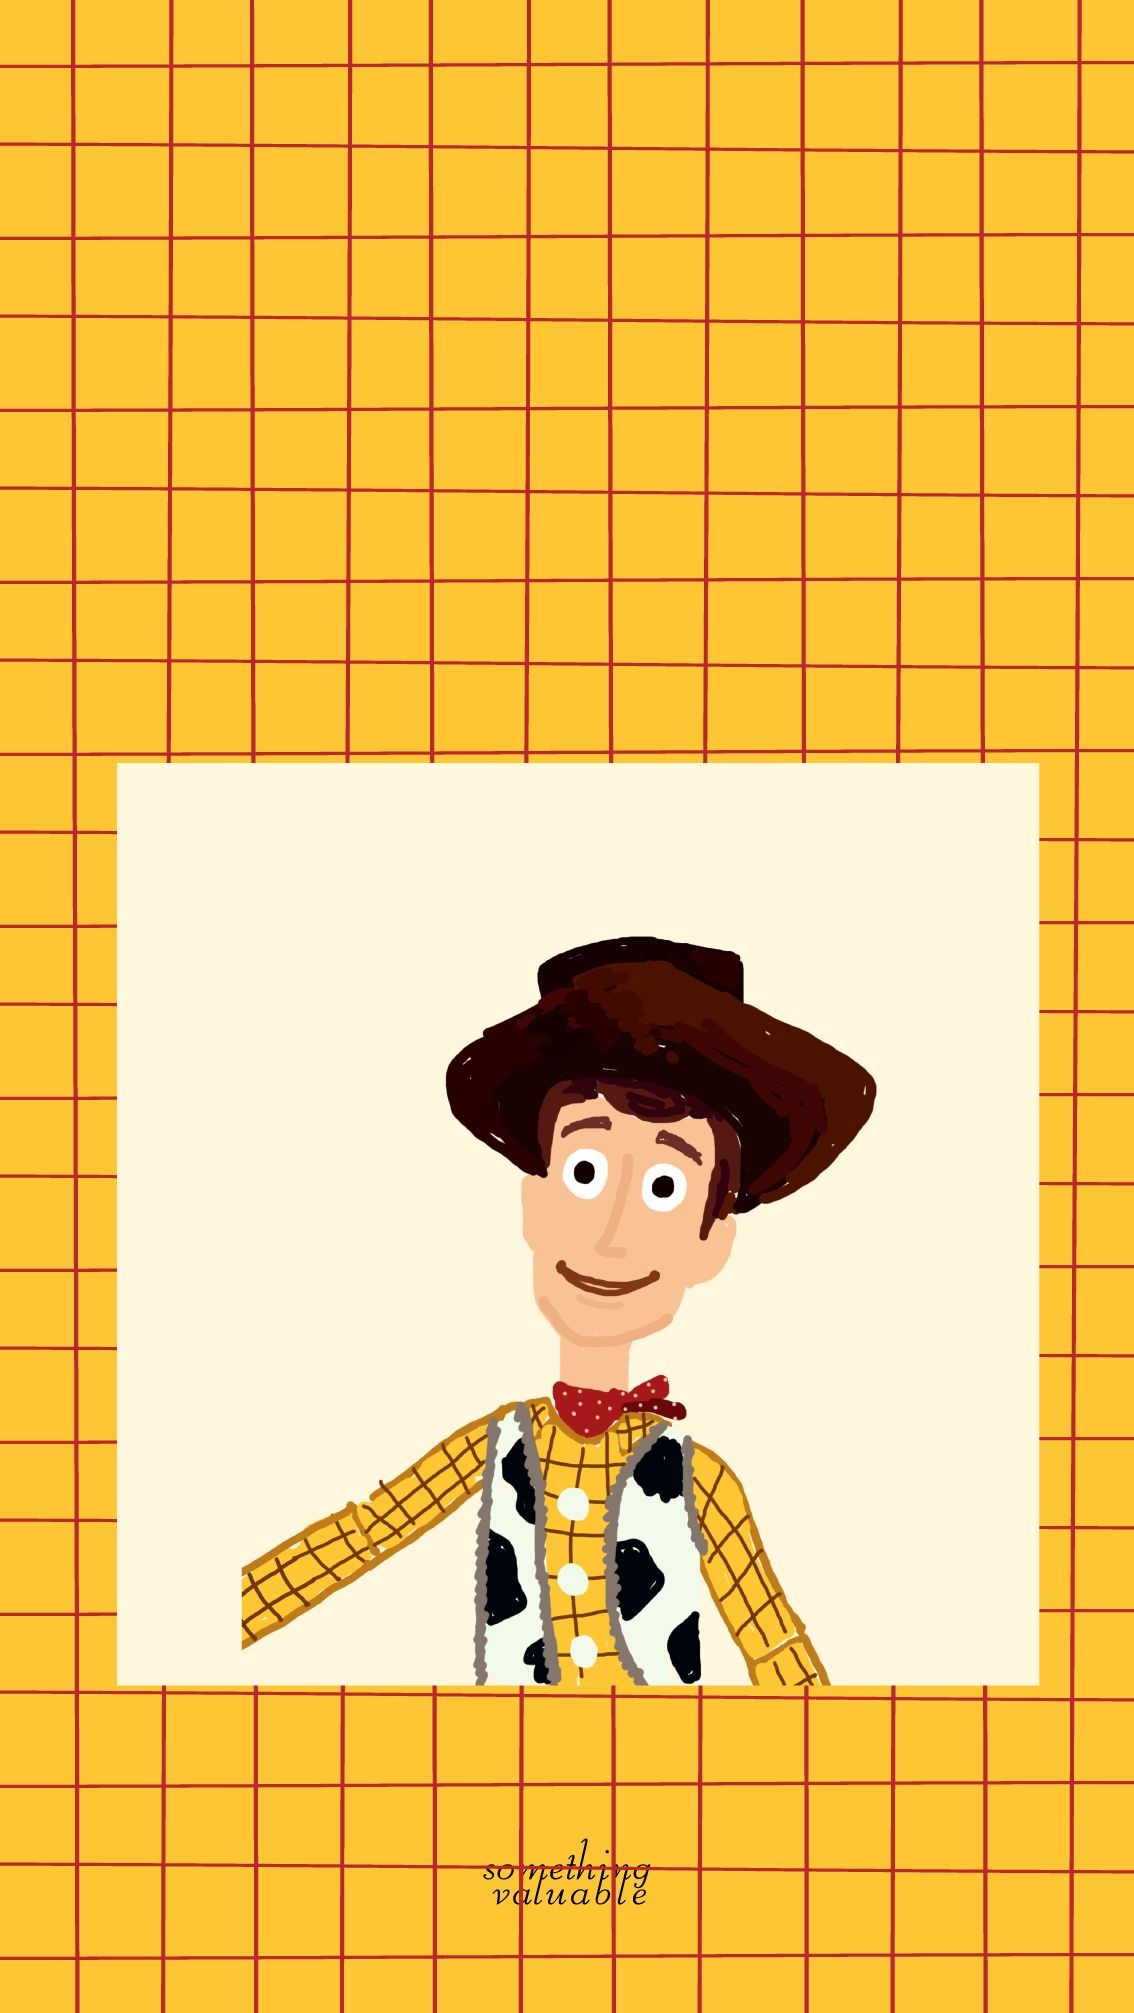 1134x13 Iphone Wallpaper Design Toystory Woody Woody Wallpaper Toy Story Iphone 1134x13 Wallpaper Teahub Io